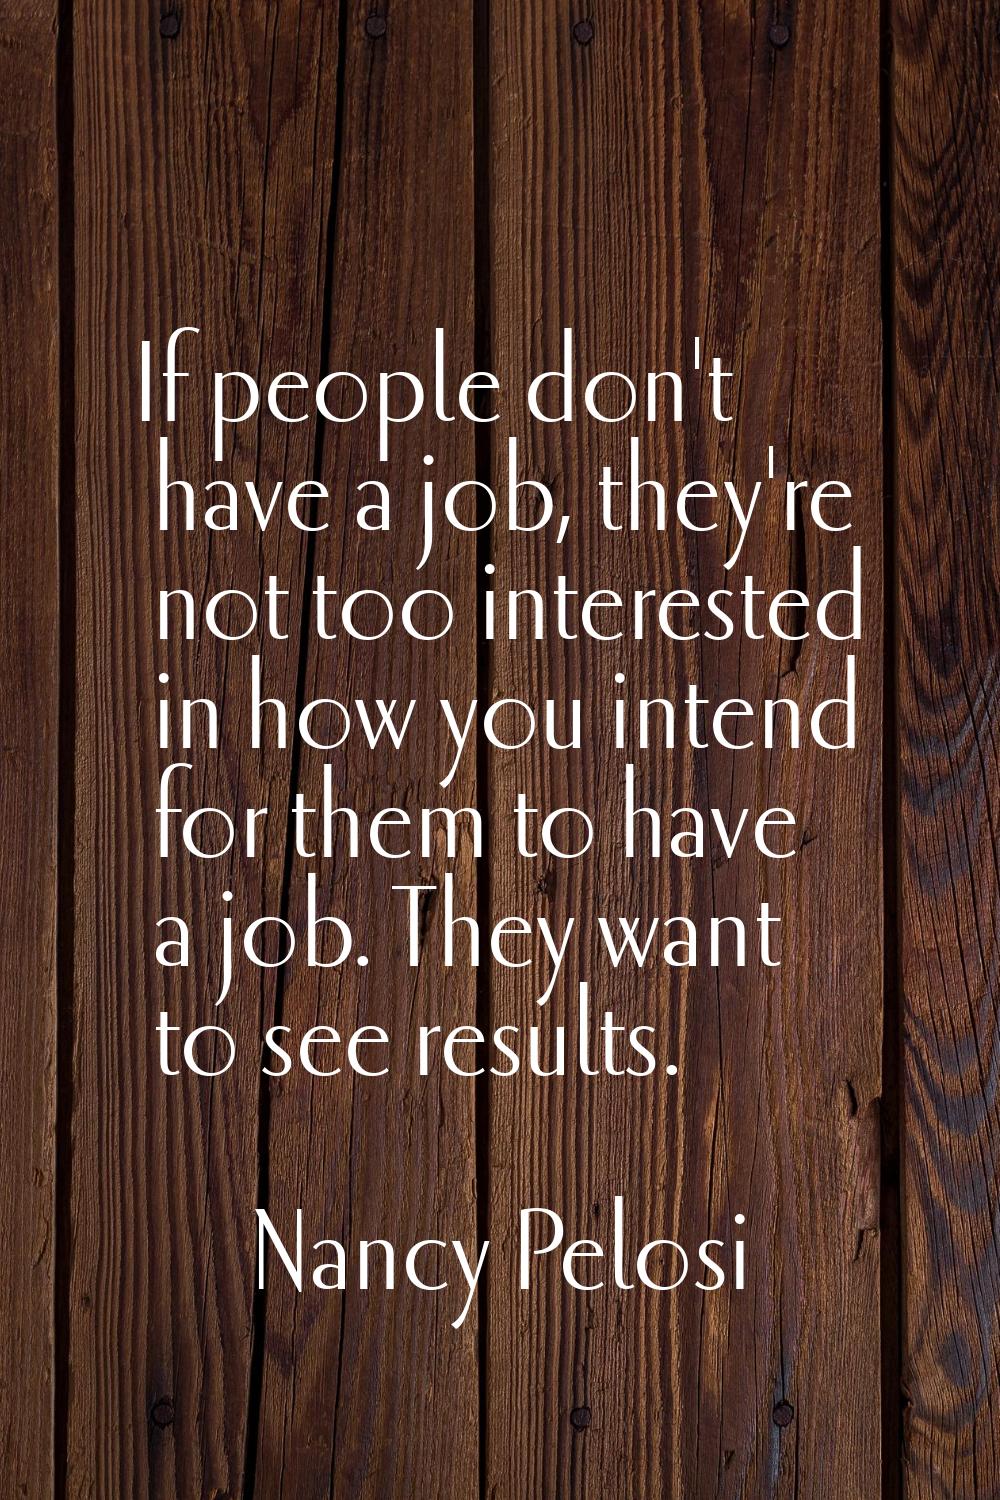 If people don't have a job, they're not too interested in how you intend for them to have a job. Th